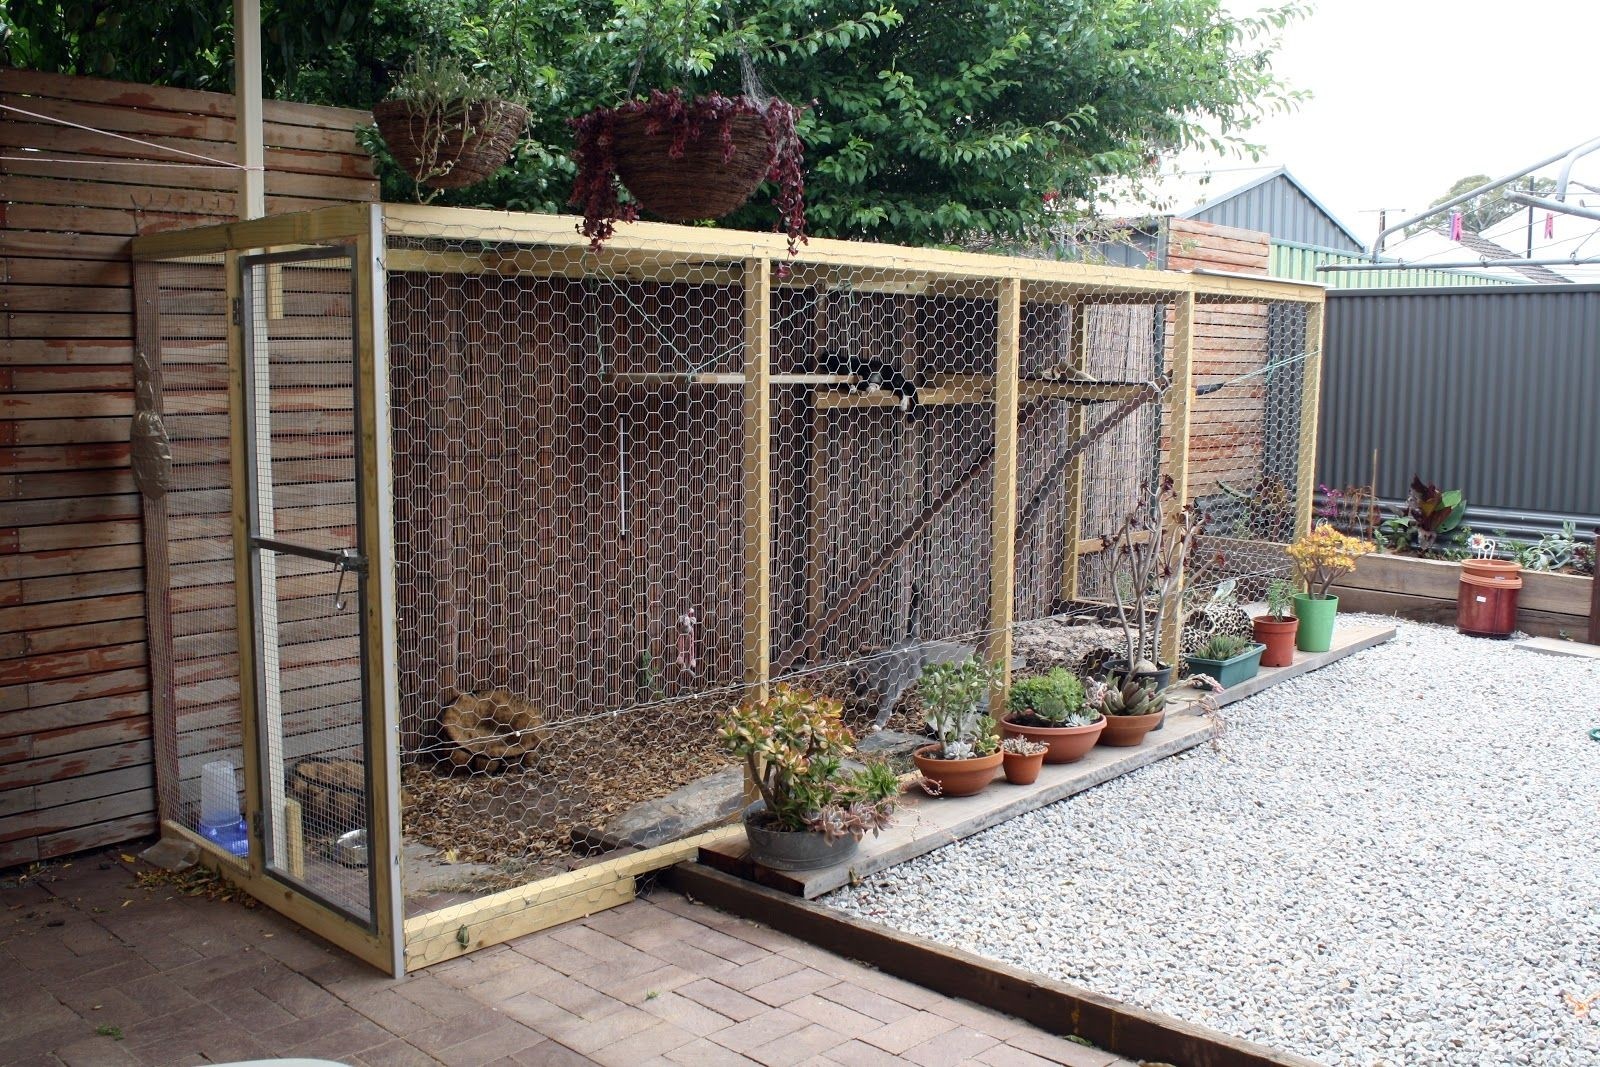 Outdoor cat enclosures for sale